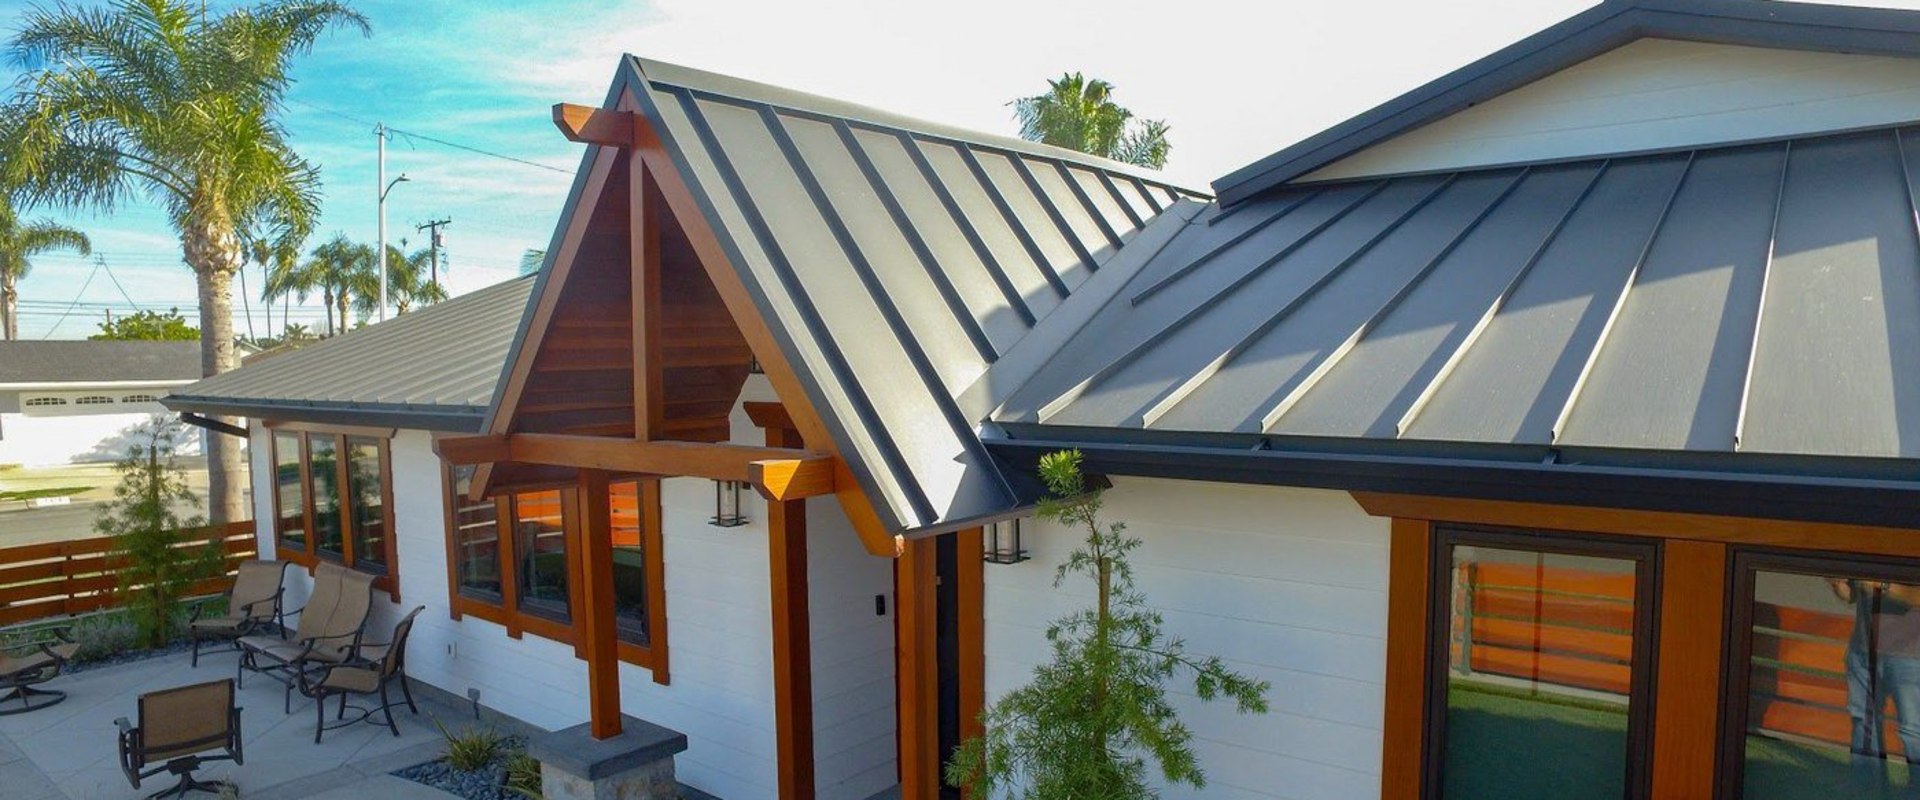 Shine Bright Like Metal: Illuminating Your Lake Worth Home Remodel With A Metal Roof